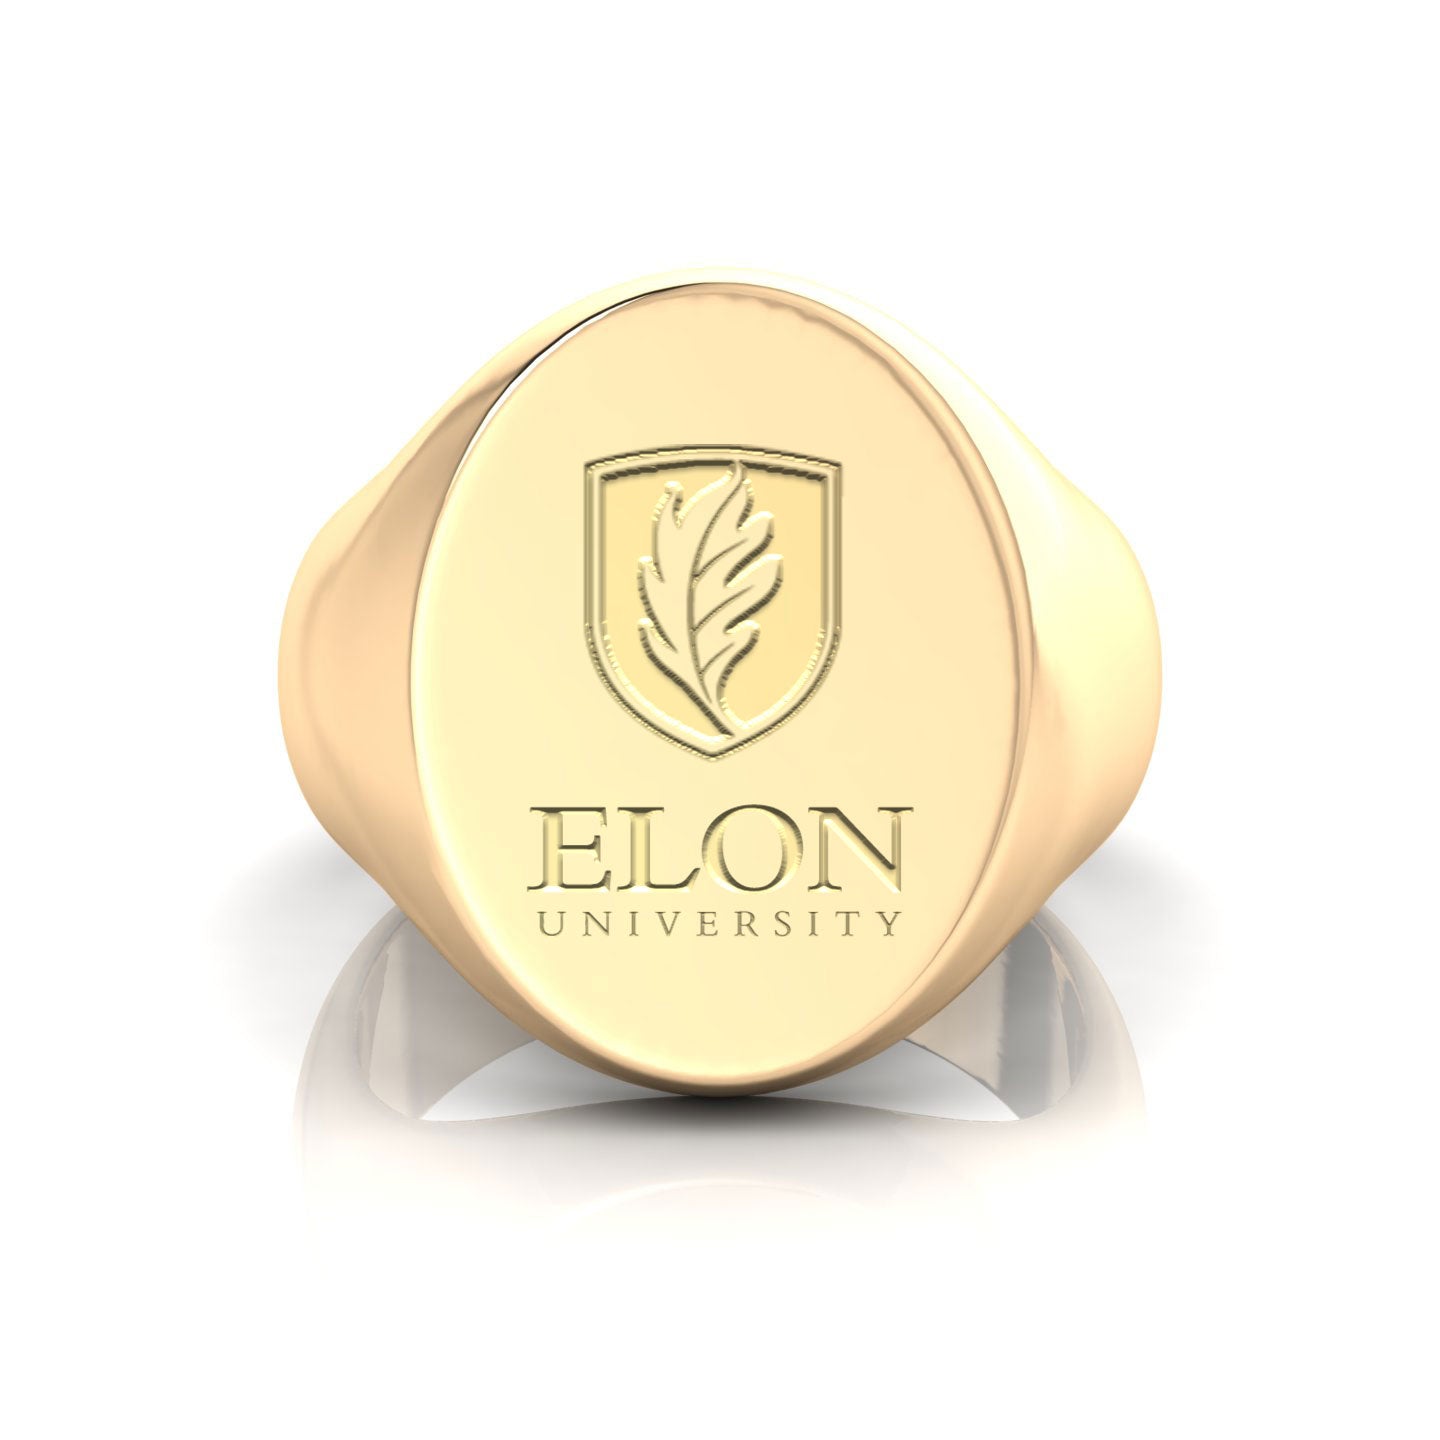 A close-up of the front view of an Elon University Meta Class Ring made of 14kt yellow gold. The class ring features the Elon University logo in a raised, polished finish.